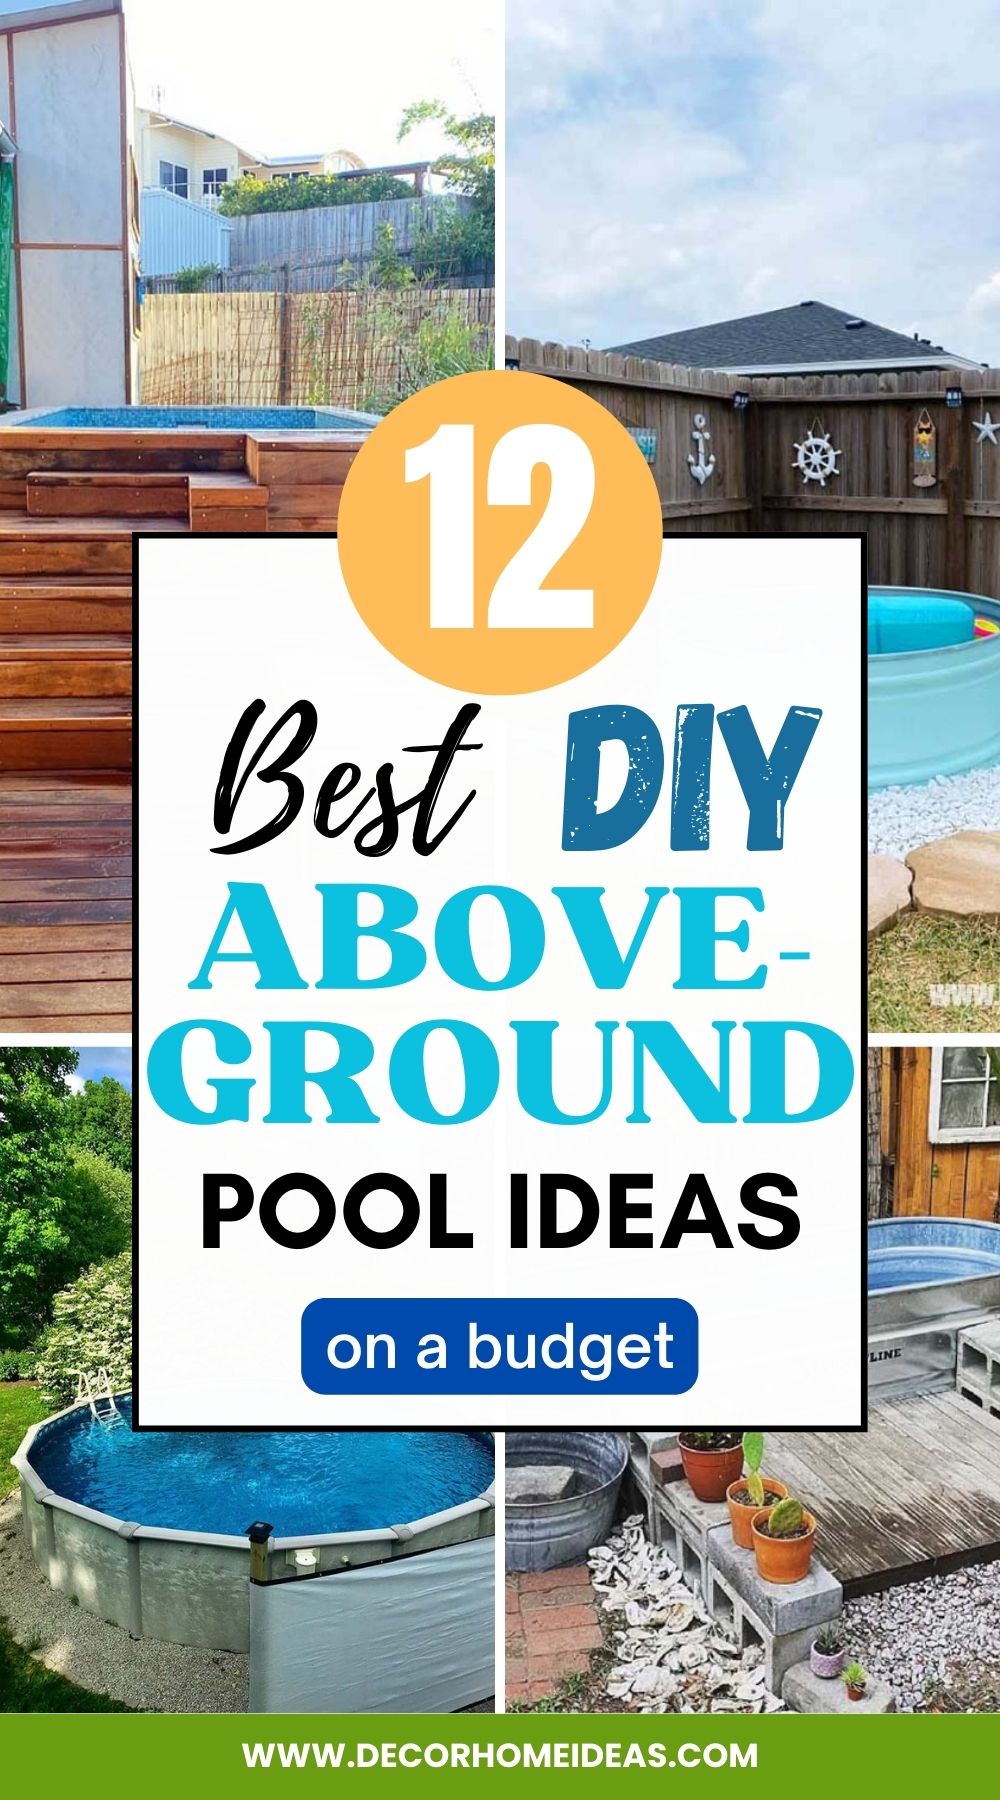 Above Ground Pool Ideas On a Budget DIY